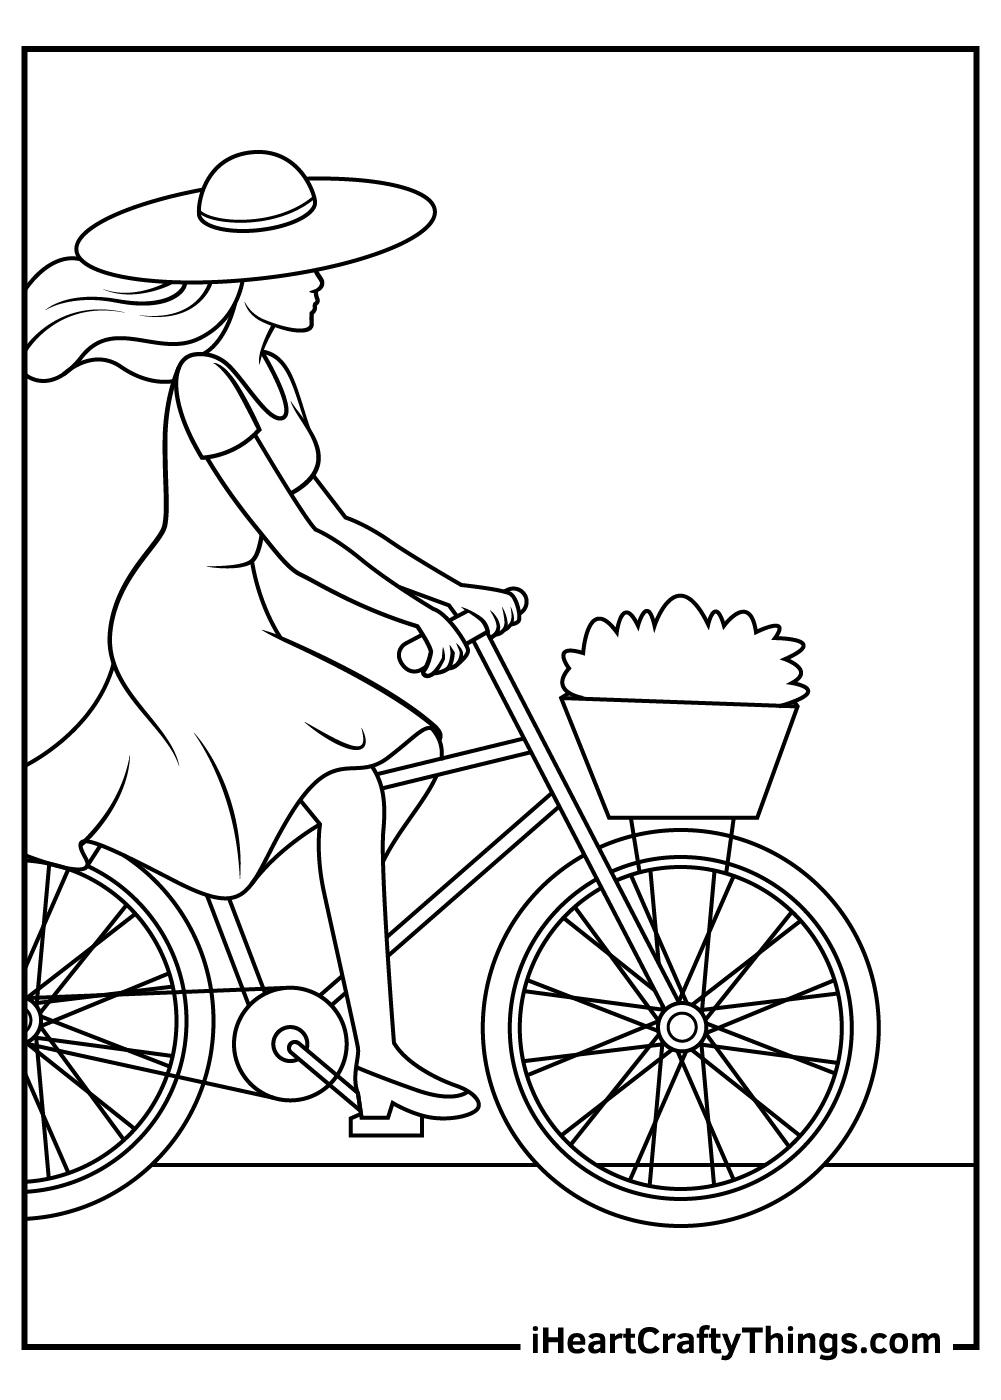 Bicycles Coloring Pages Updated 2021